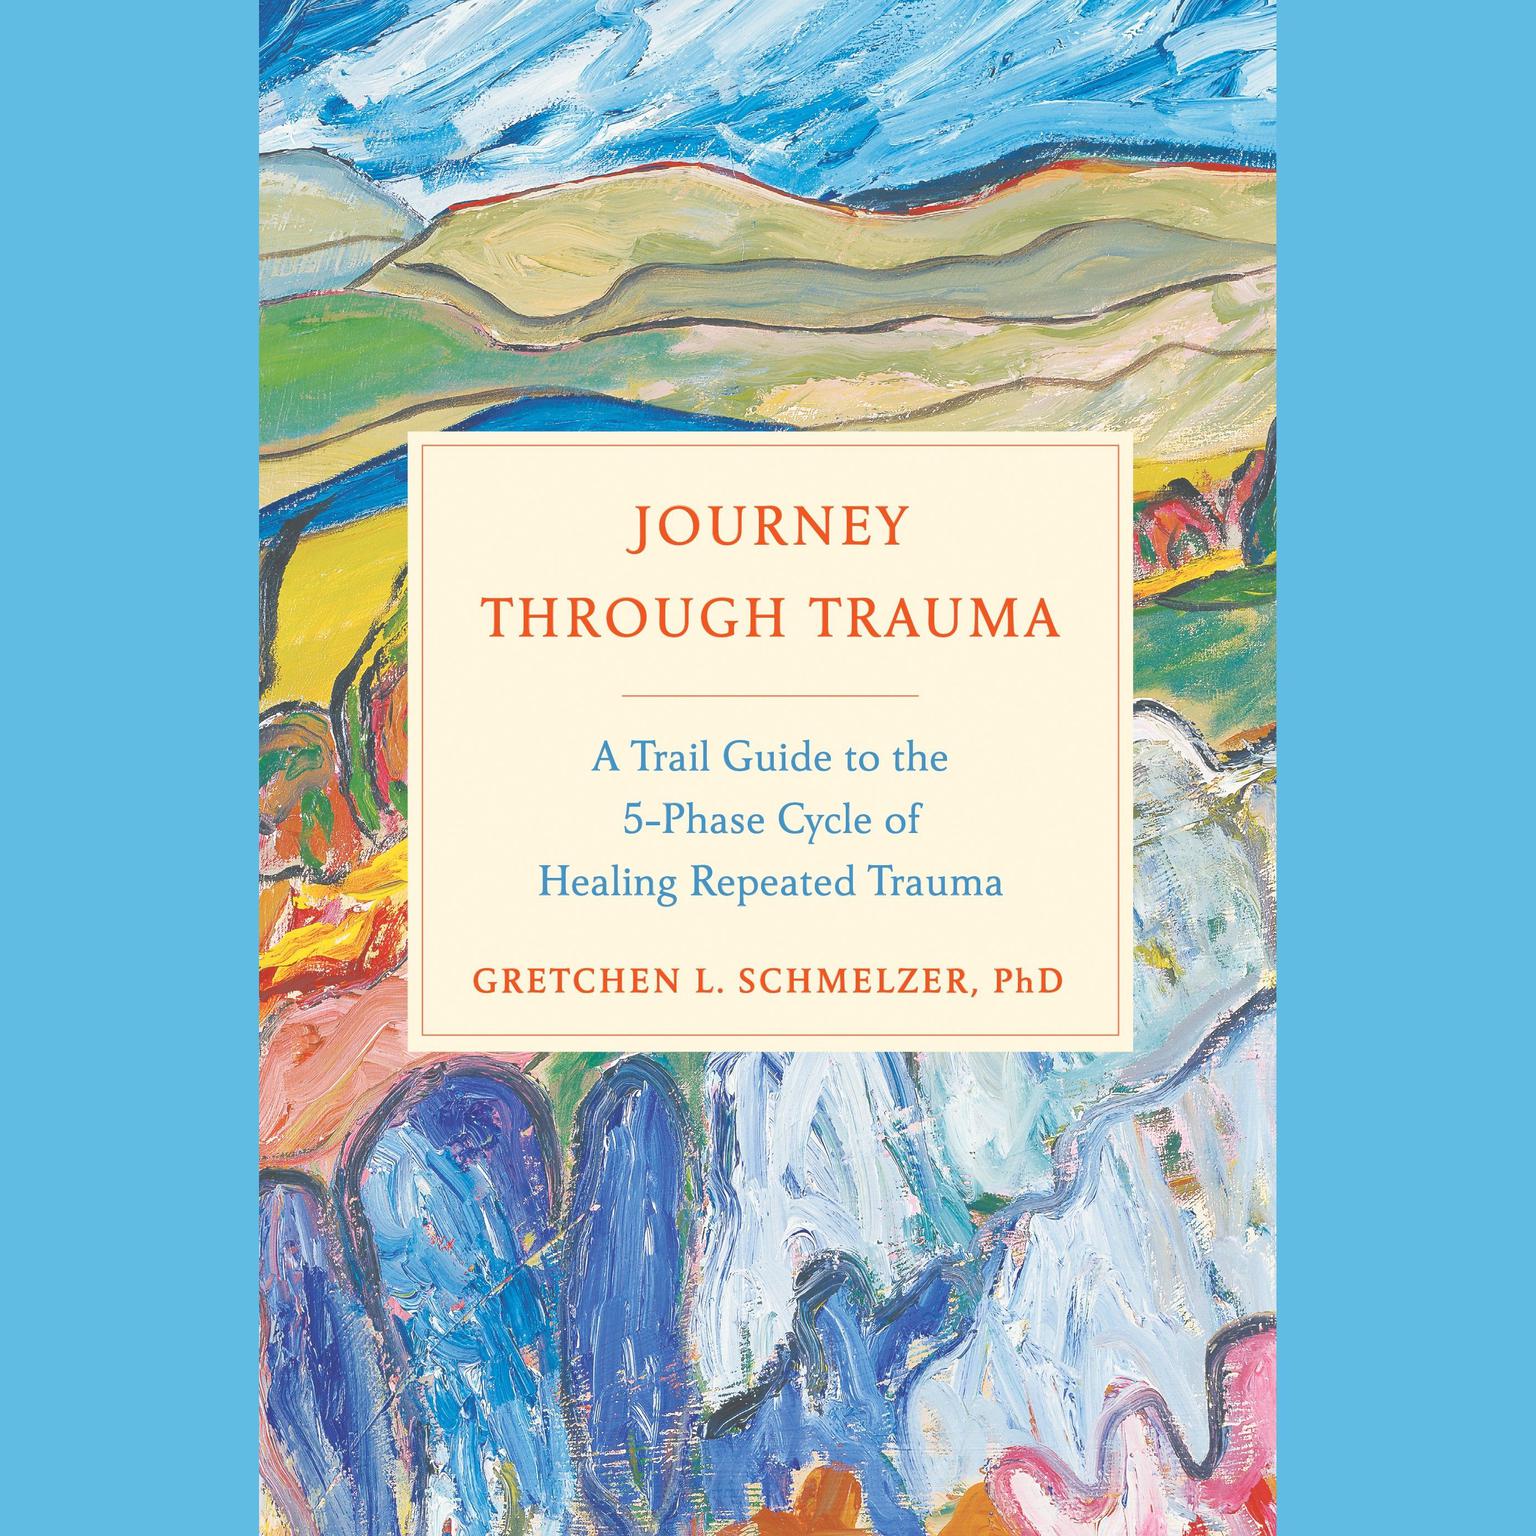 Journey Through Trauma: A Trail Guide to the 5-Phase Cycle of Healing Repeated Trauma Audiobook, by Gretchen L. Schmelzer